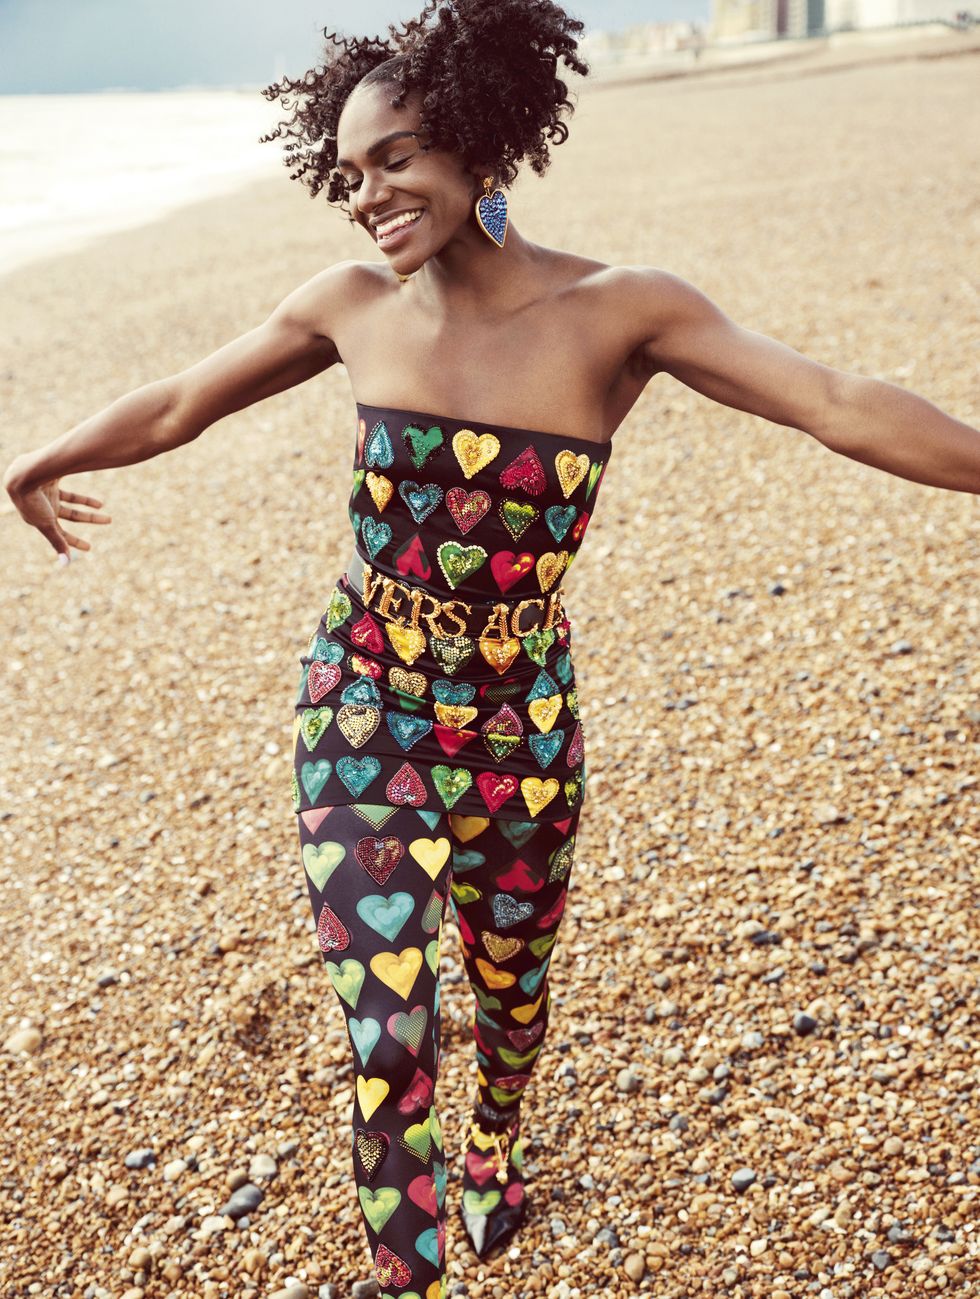 Diner Asher-Smith is Elle UK's July cover star